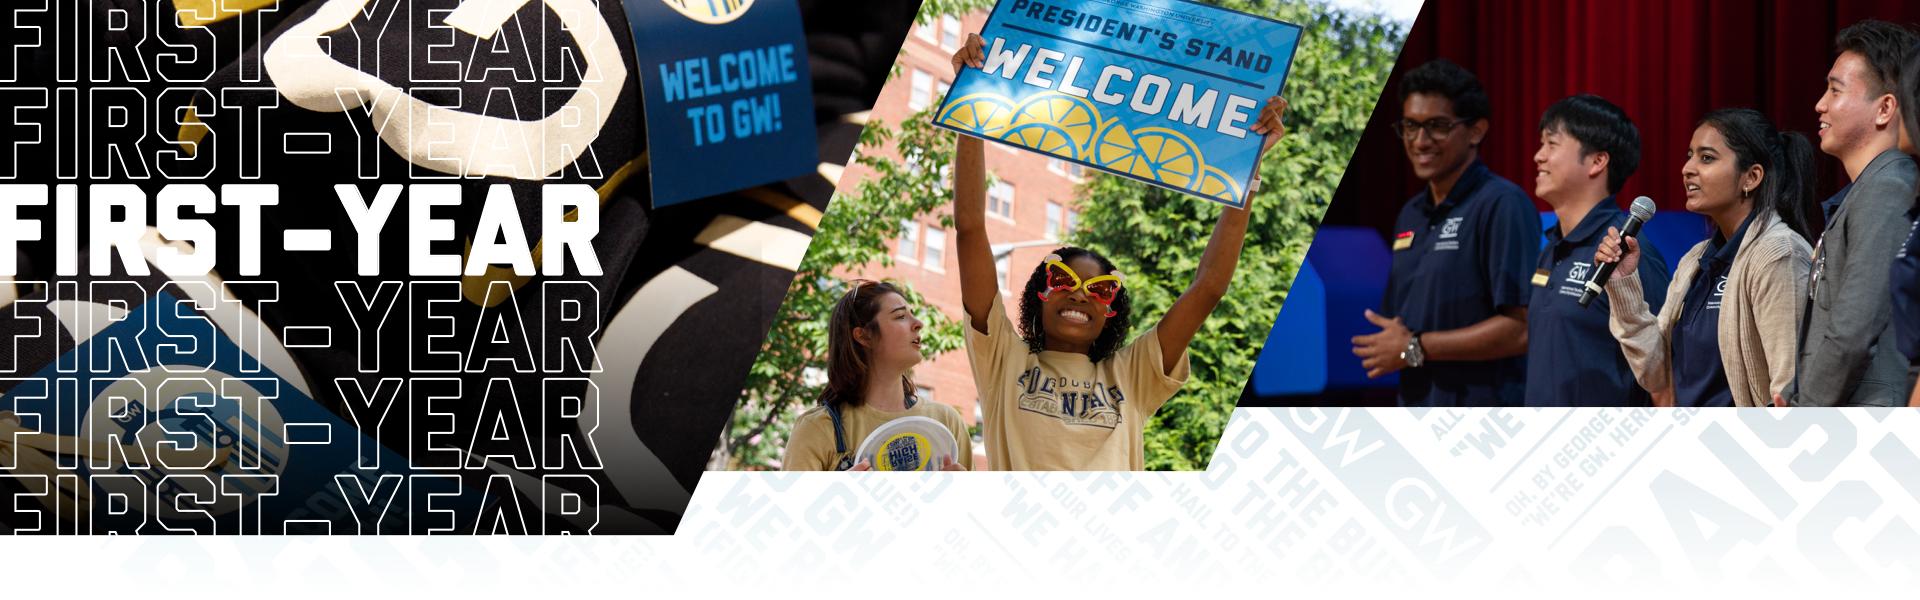 First-Year; student with welcome sign, students with microphone